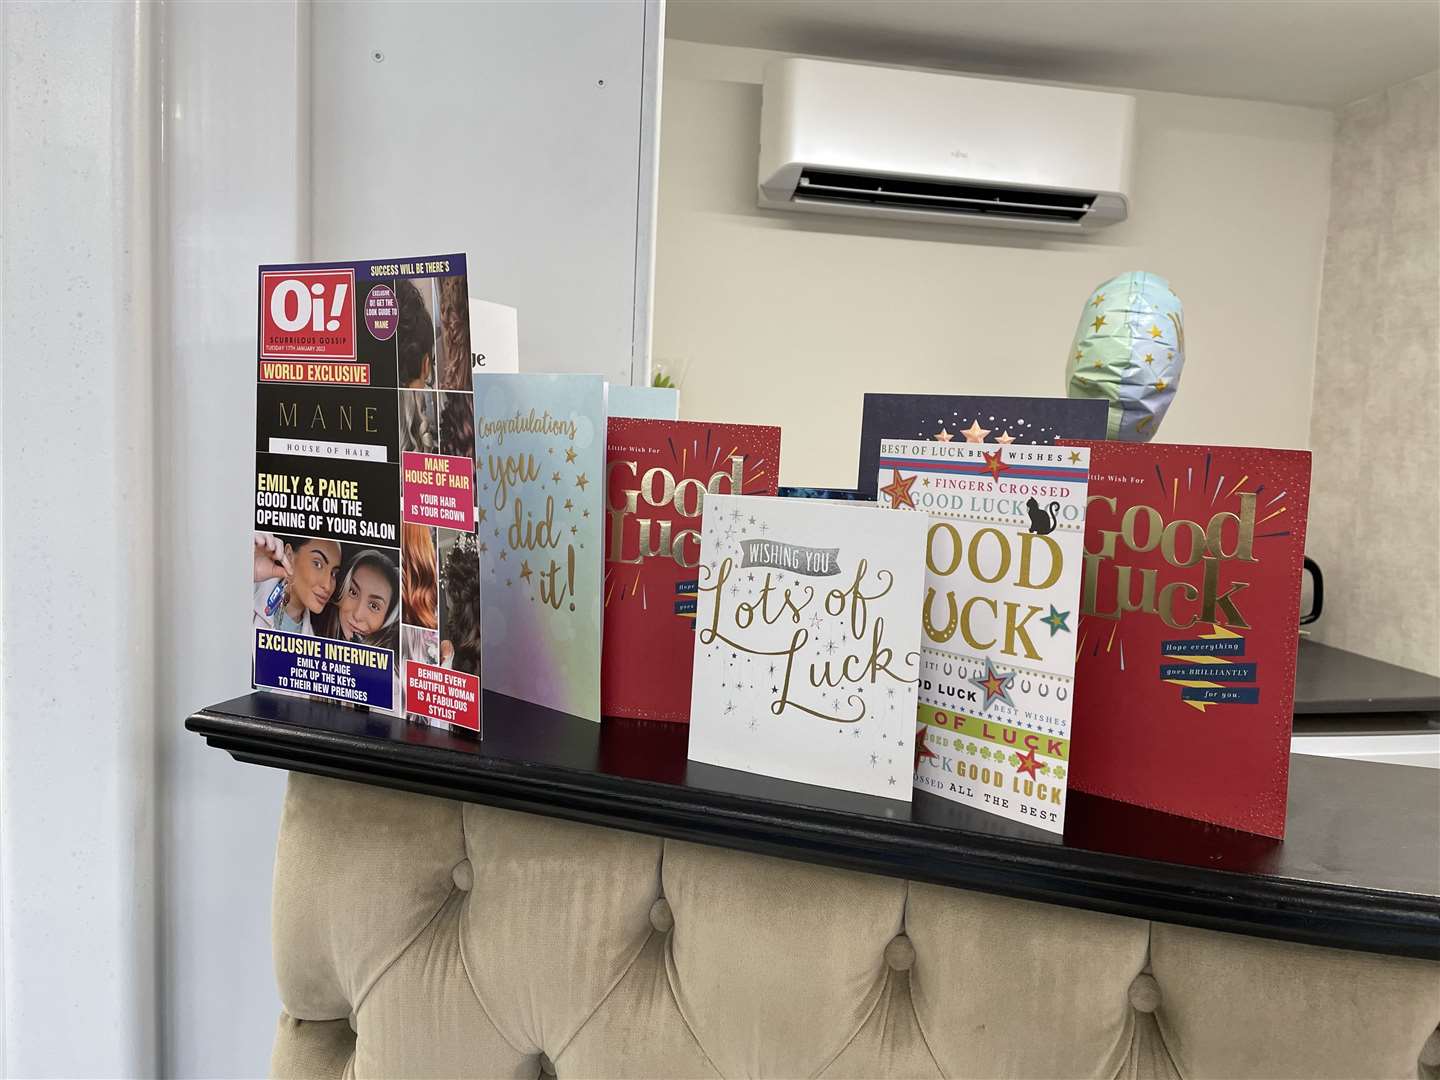 Good luck cards from clients who have followed them to the new premises